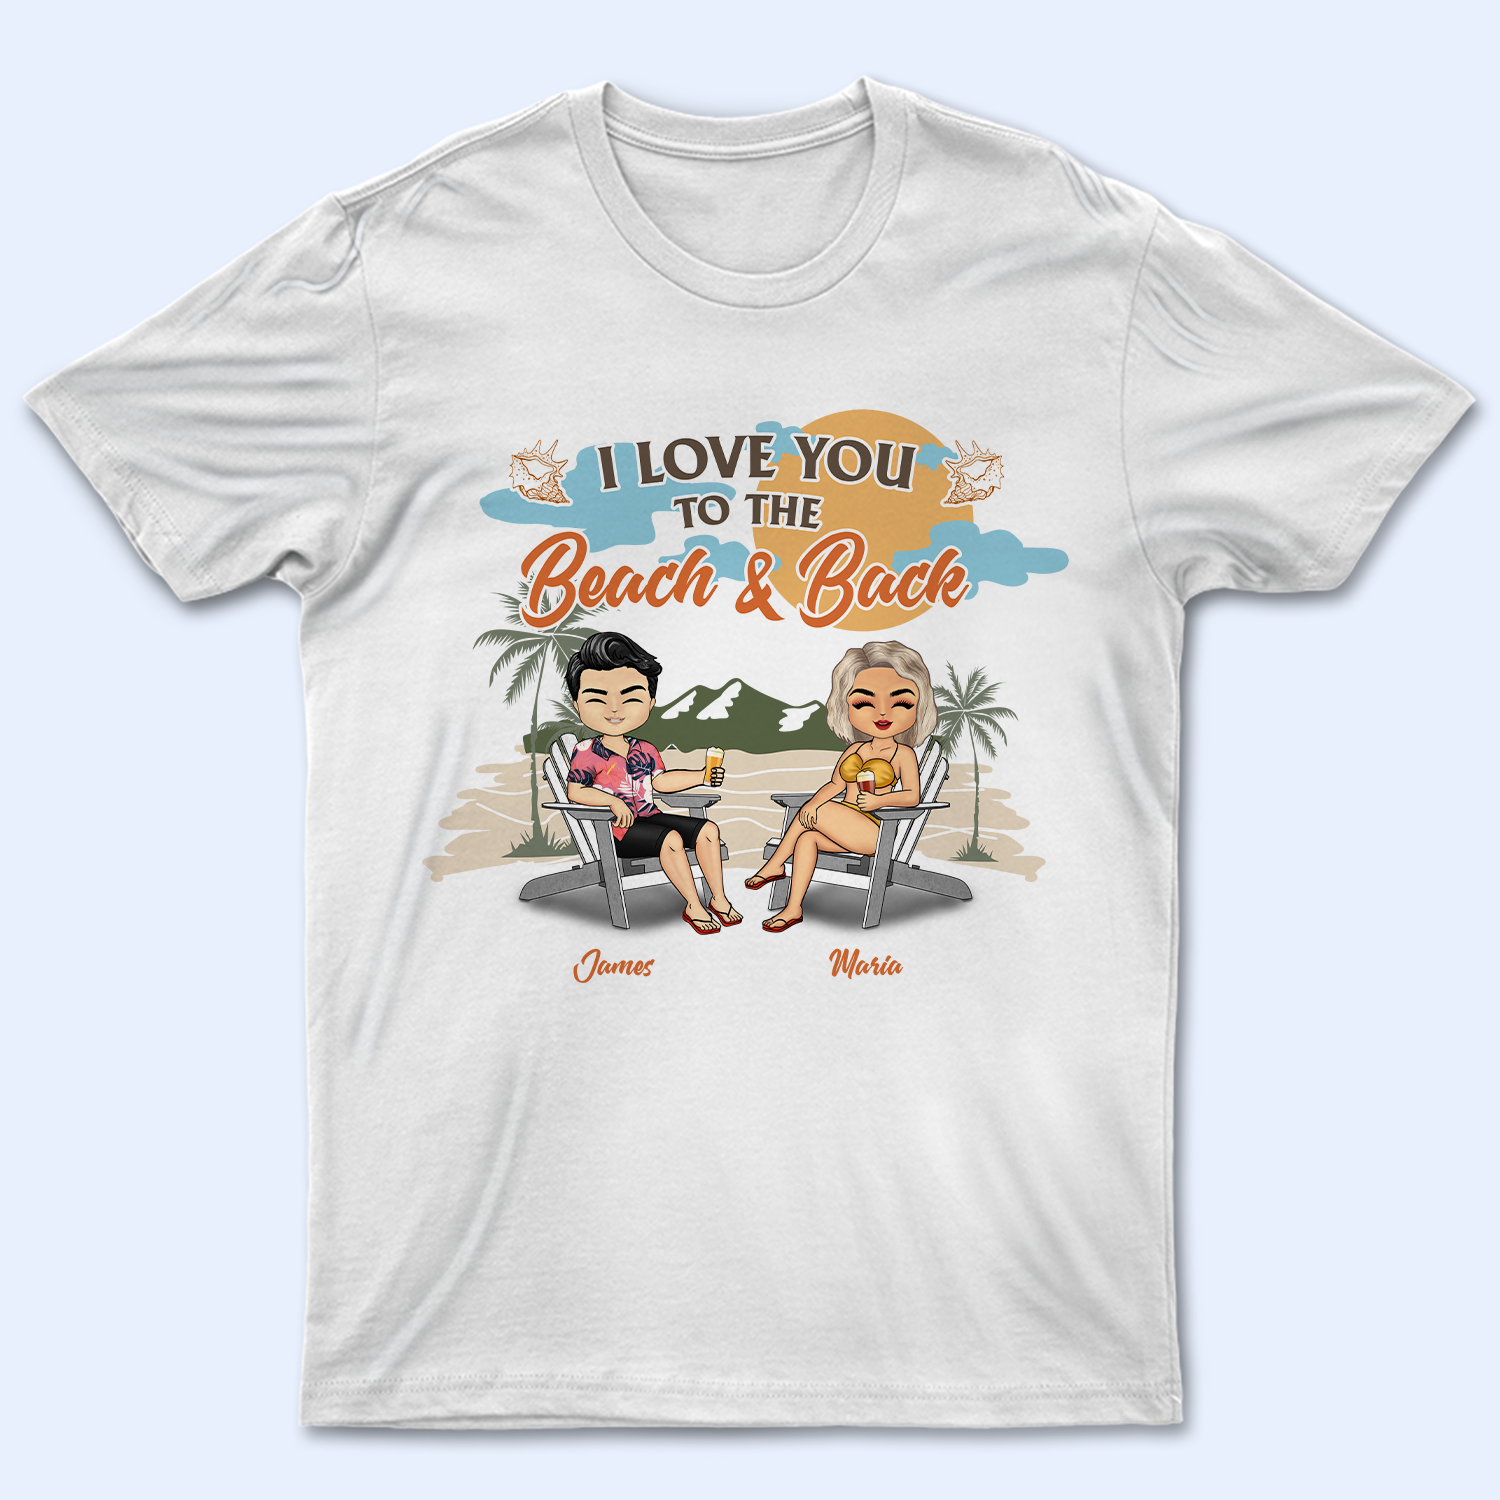 I Love You To The Beach And Back - Gift For Couples - Personalized Custom T Shirt